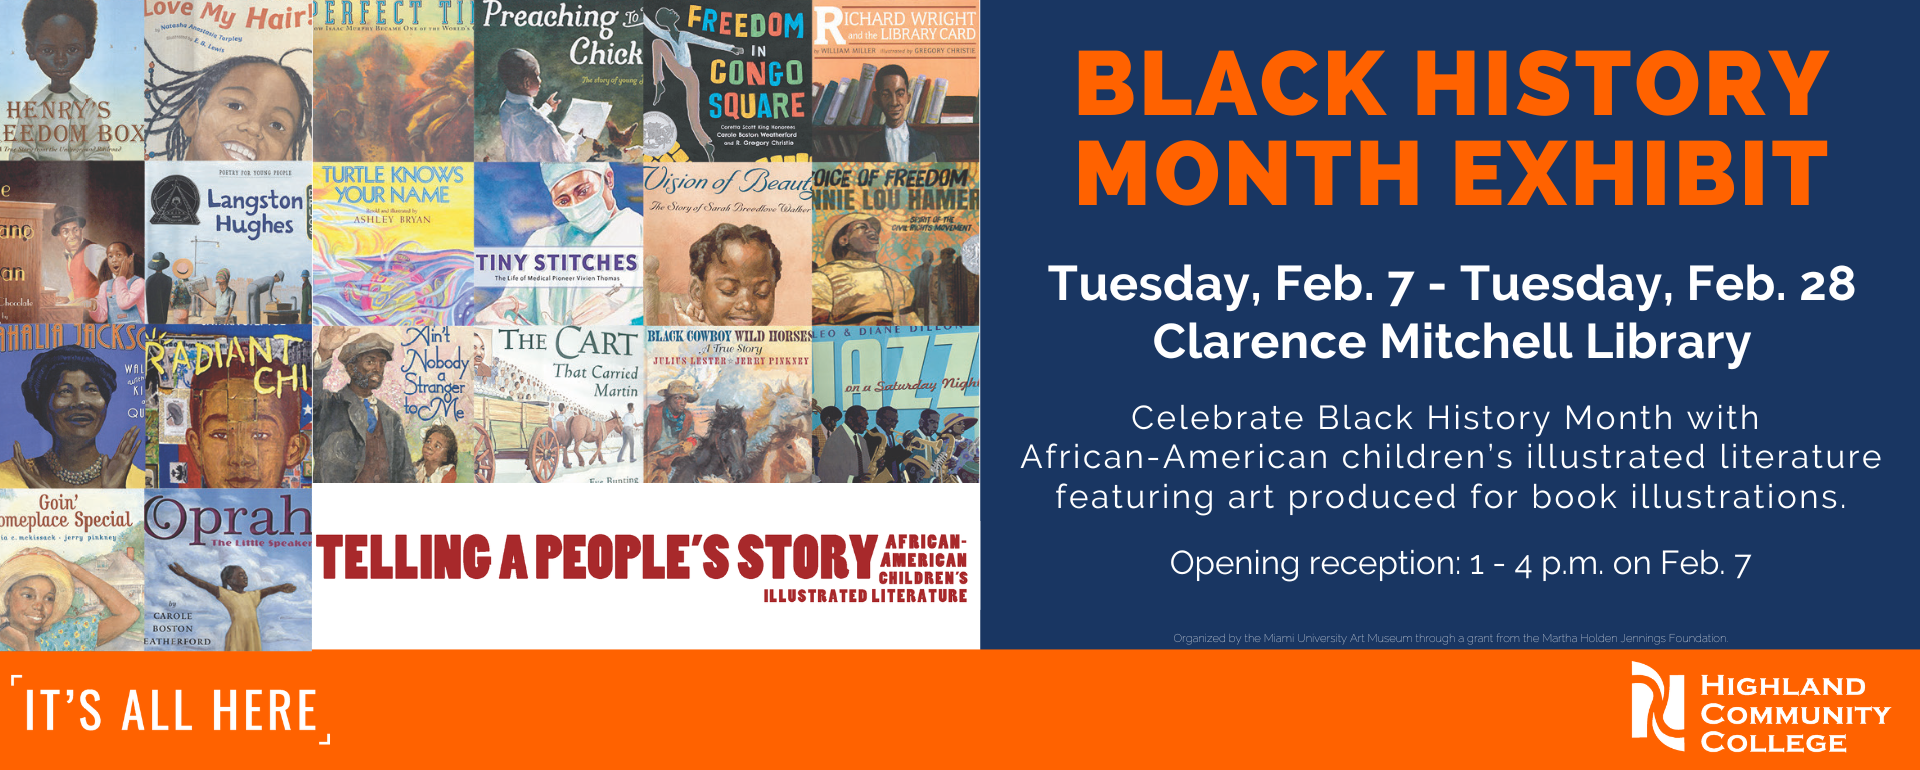 See the Black History Month Exhibit, "Telling a People's Story: African-American Children's Illustrated Literature" at the Clarence Mitchell Library from Feb. 7 to Feb. 28. The opening reception will be at the library on Feb. 7 from 1 to 4 pm. Graphic includes covers of books, the exhibit logo and additional text saying Celebrate Black History Month with African-American children’s illustrated literature featuring art produced for book illustrations. Organized by the Miami University Art Museum through a grant from the Martha Holden Jennings Foundation.